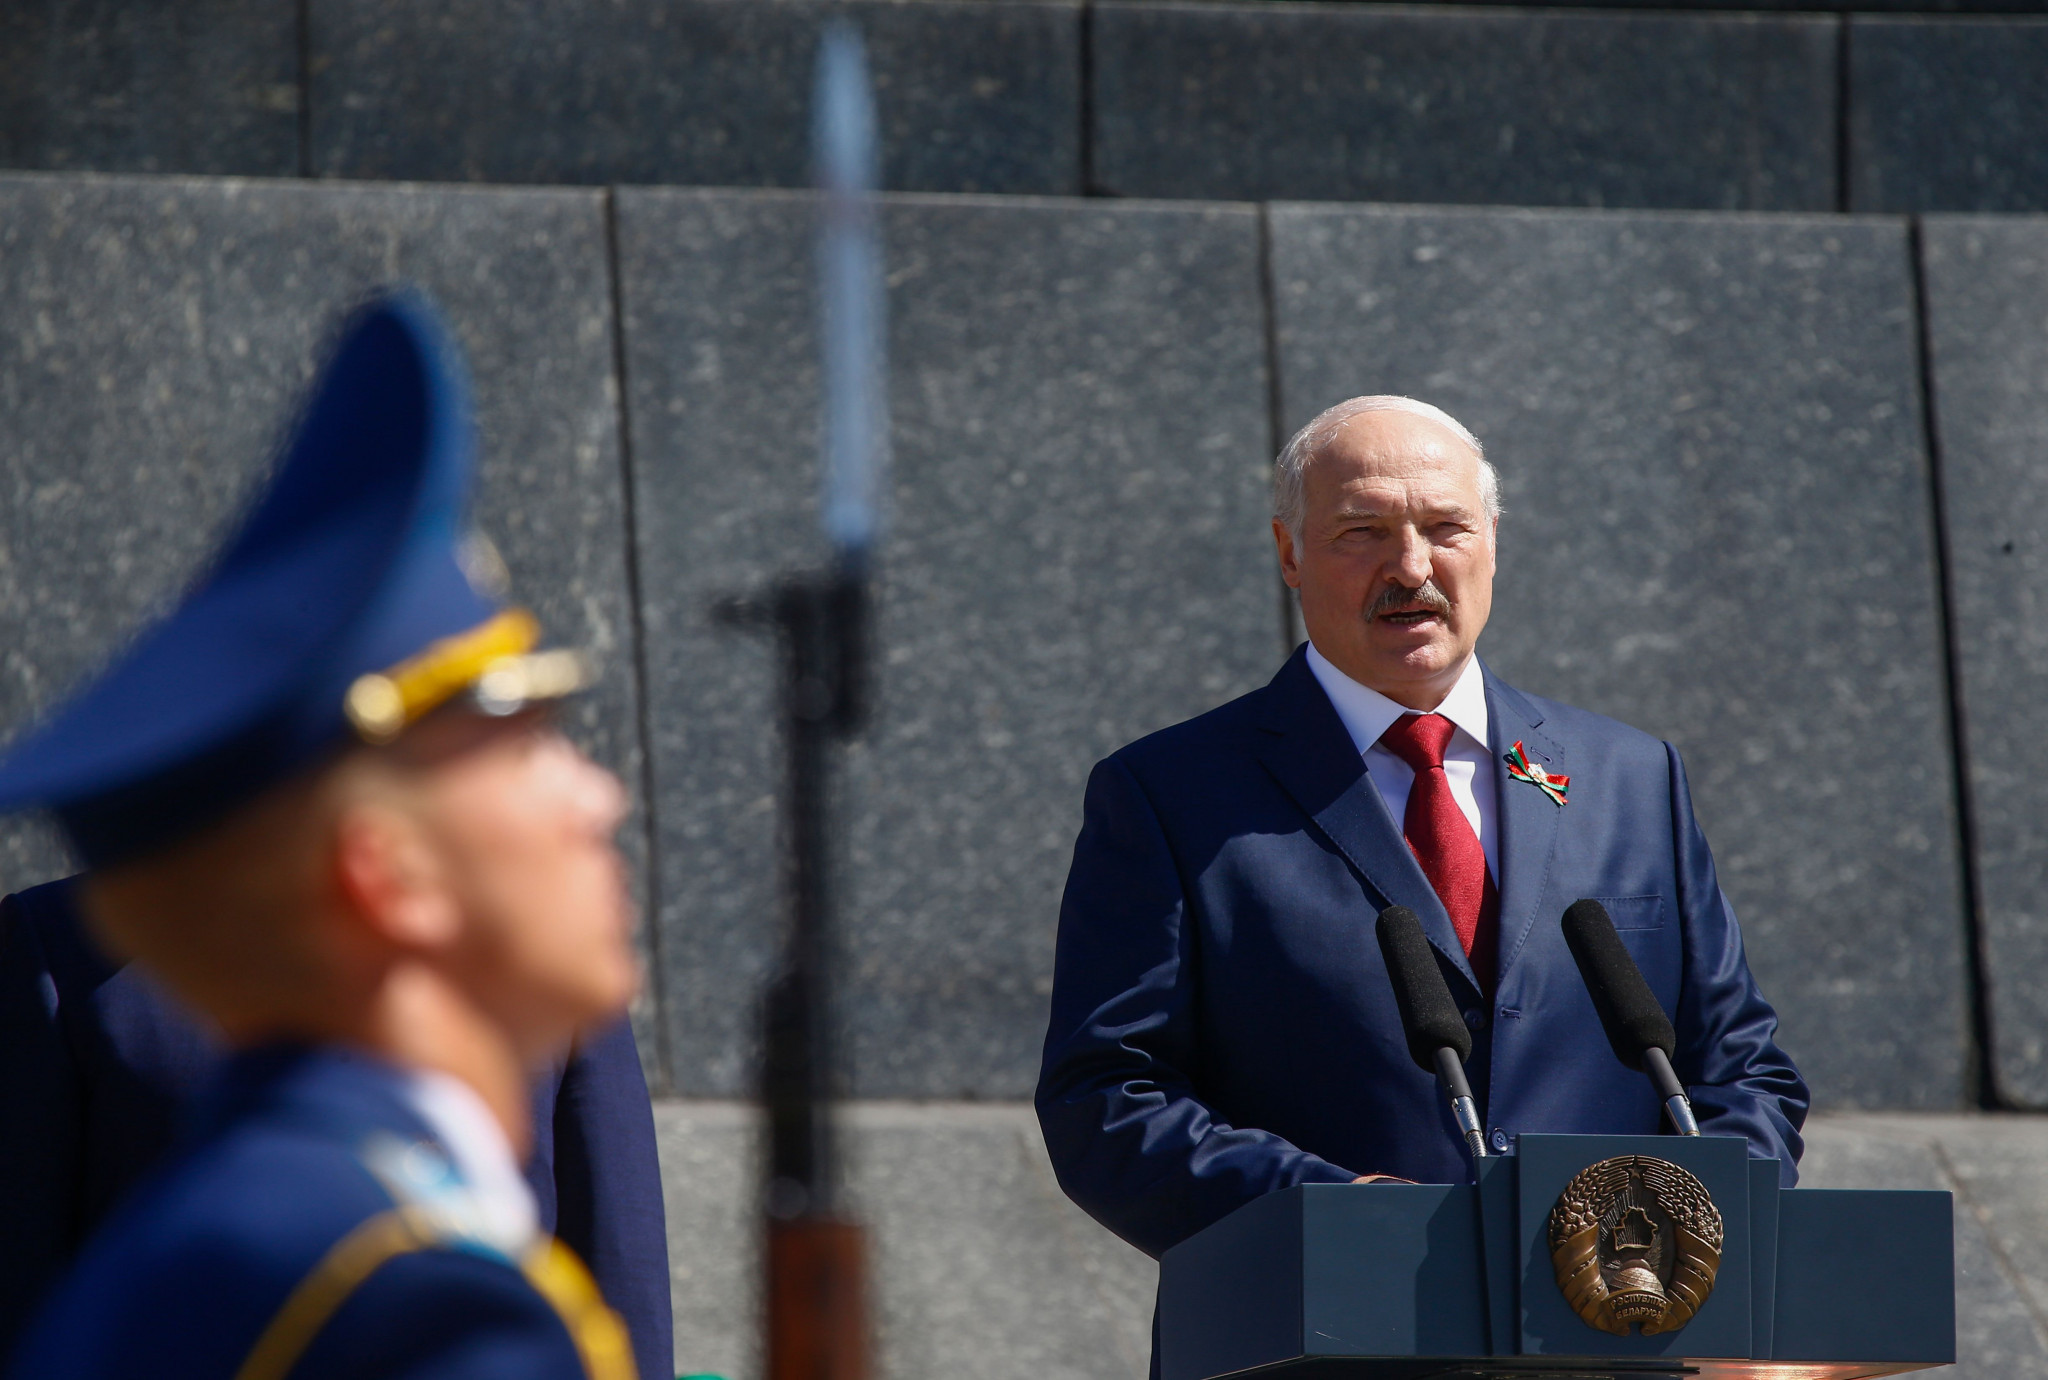 Human rights concerns over Alexander Lukashenko's leadership of Belarus are likely to generate headlines in the build-up to Minsk 2019 ©Getty Images